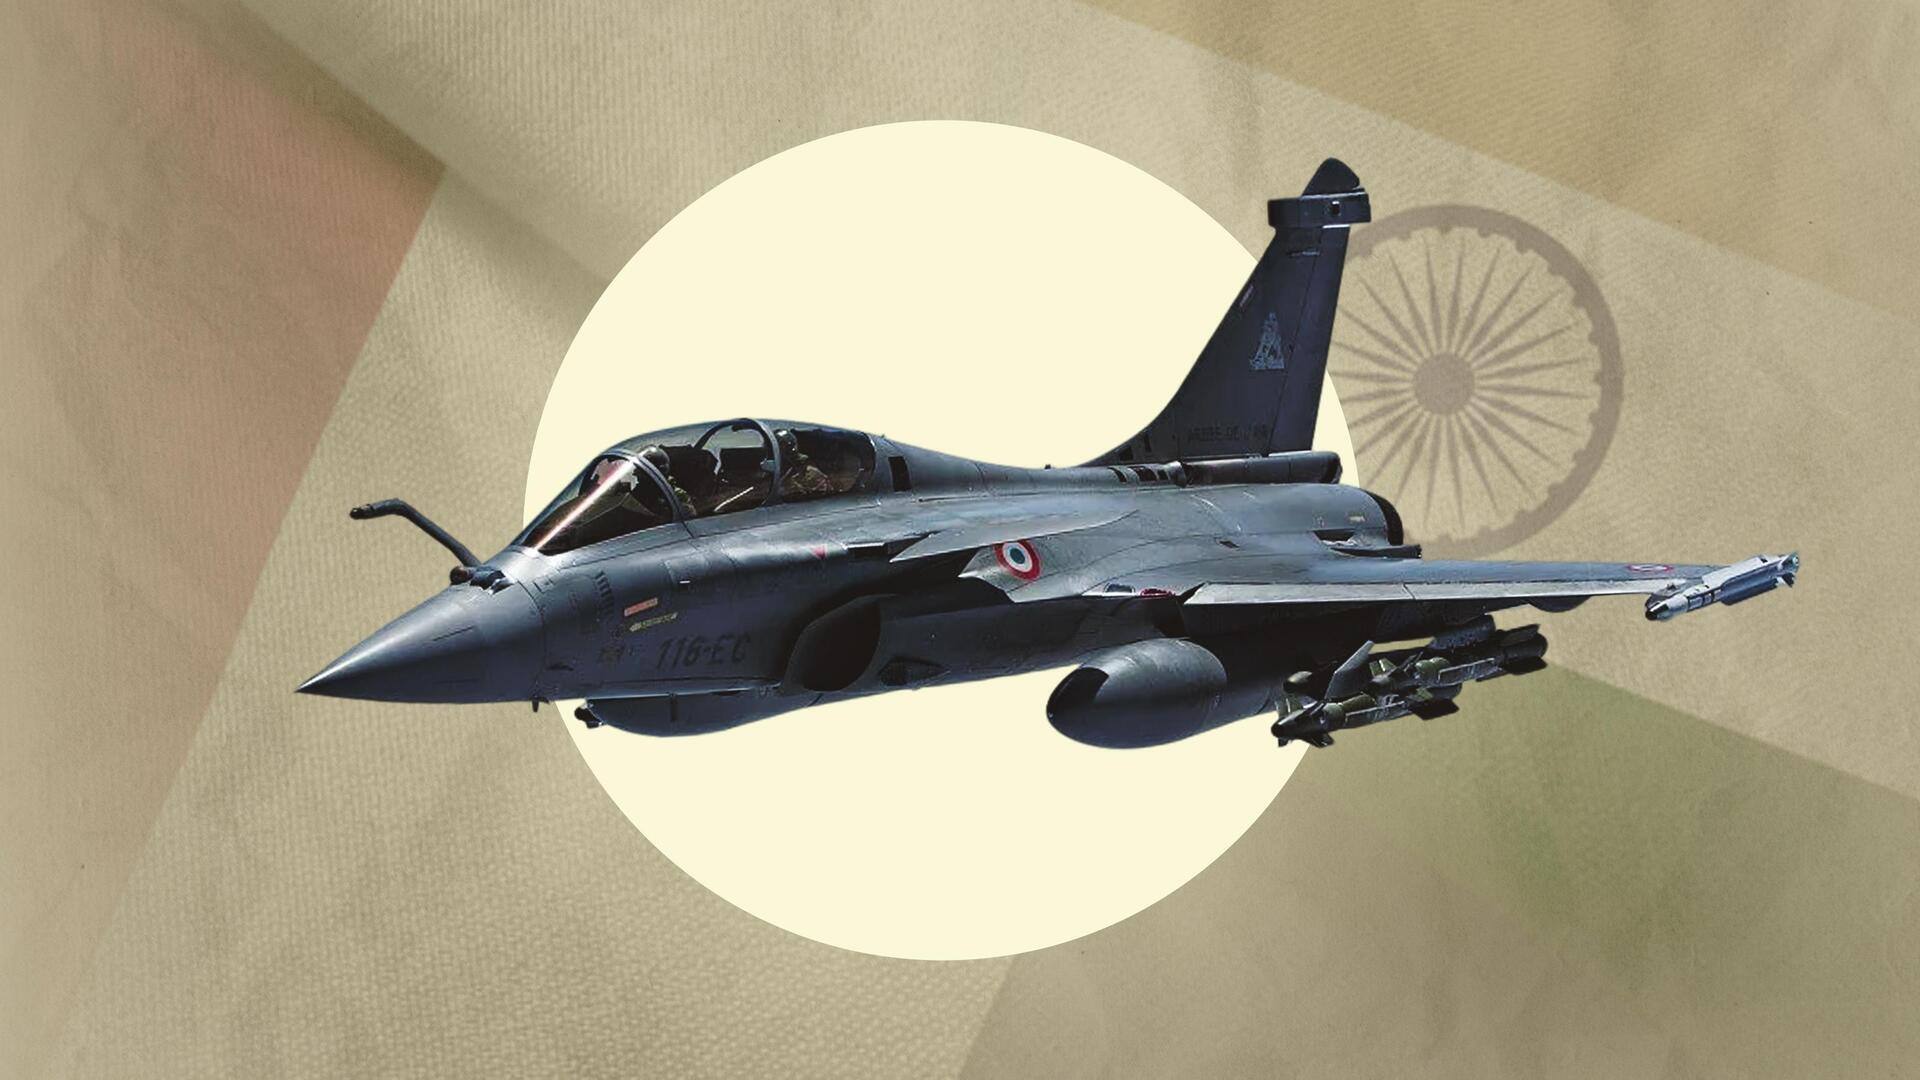 Why India-France didn't announce Rafale, Scorpene deals in joint statement